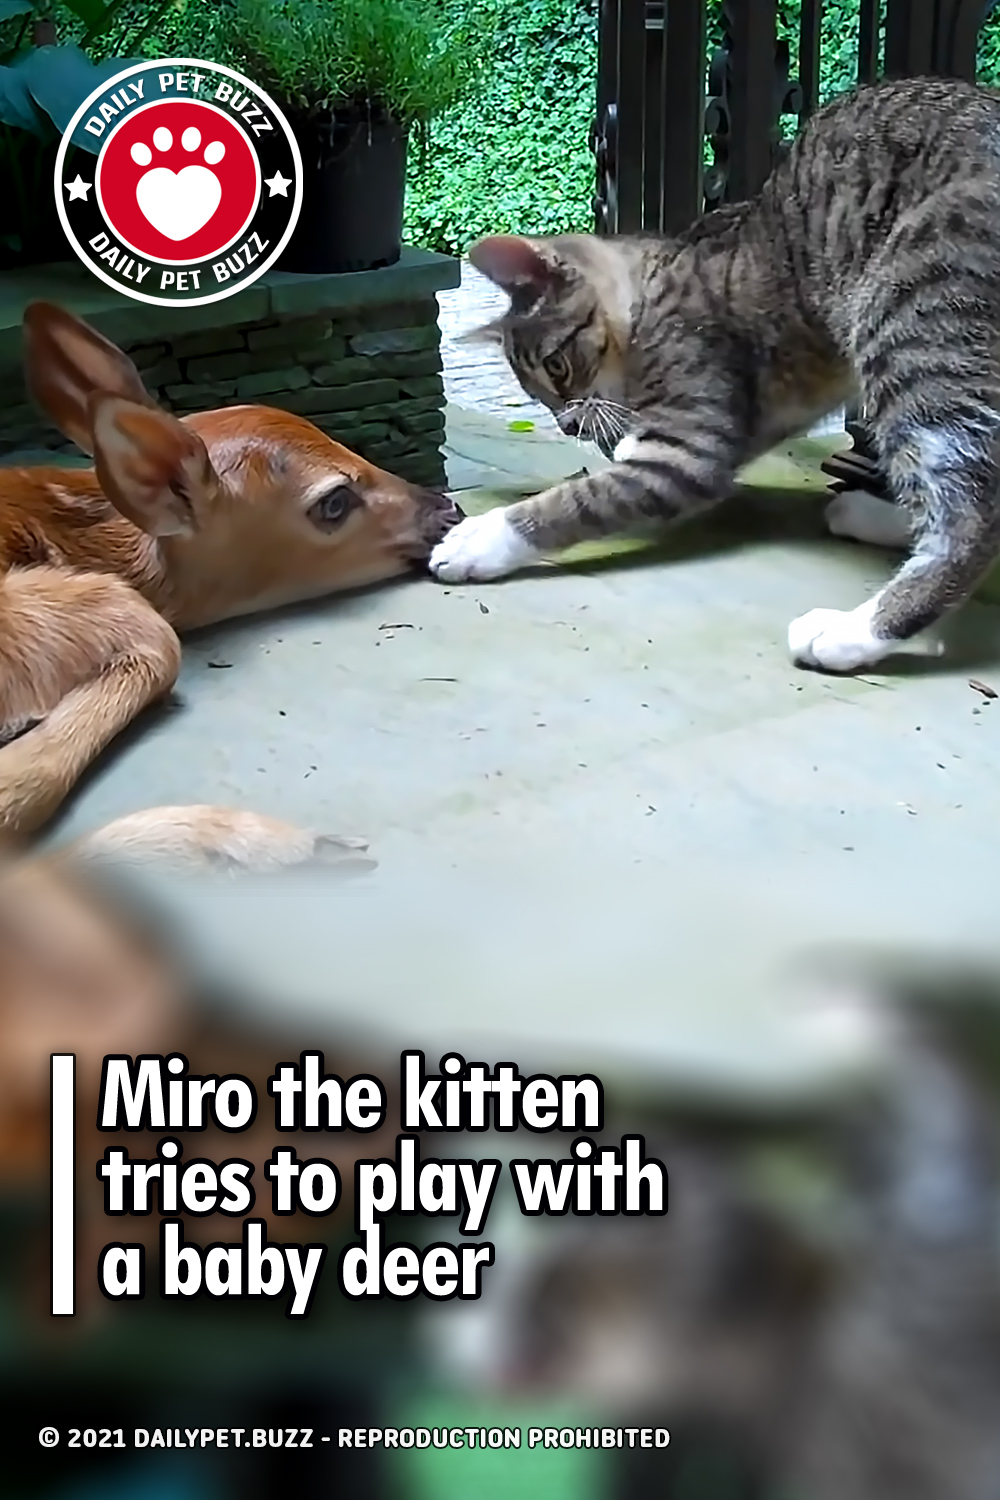 Miro the kitten tries to play with a baby deer